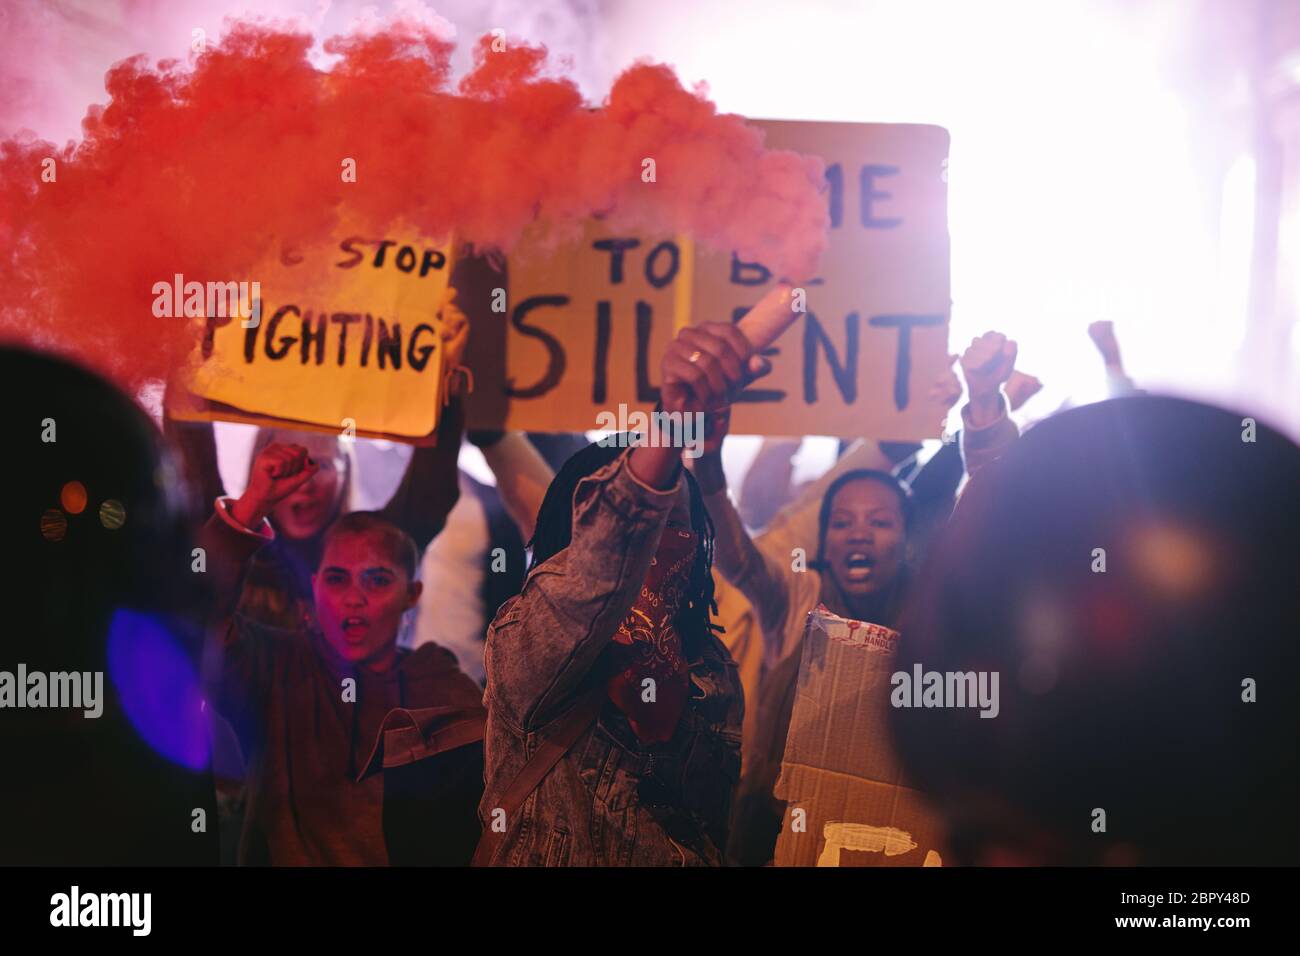 Group of people protesting with smoke grenades and banners. Group of men and women on anti-government protest at night. Stock Photo